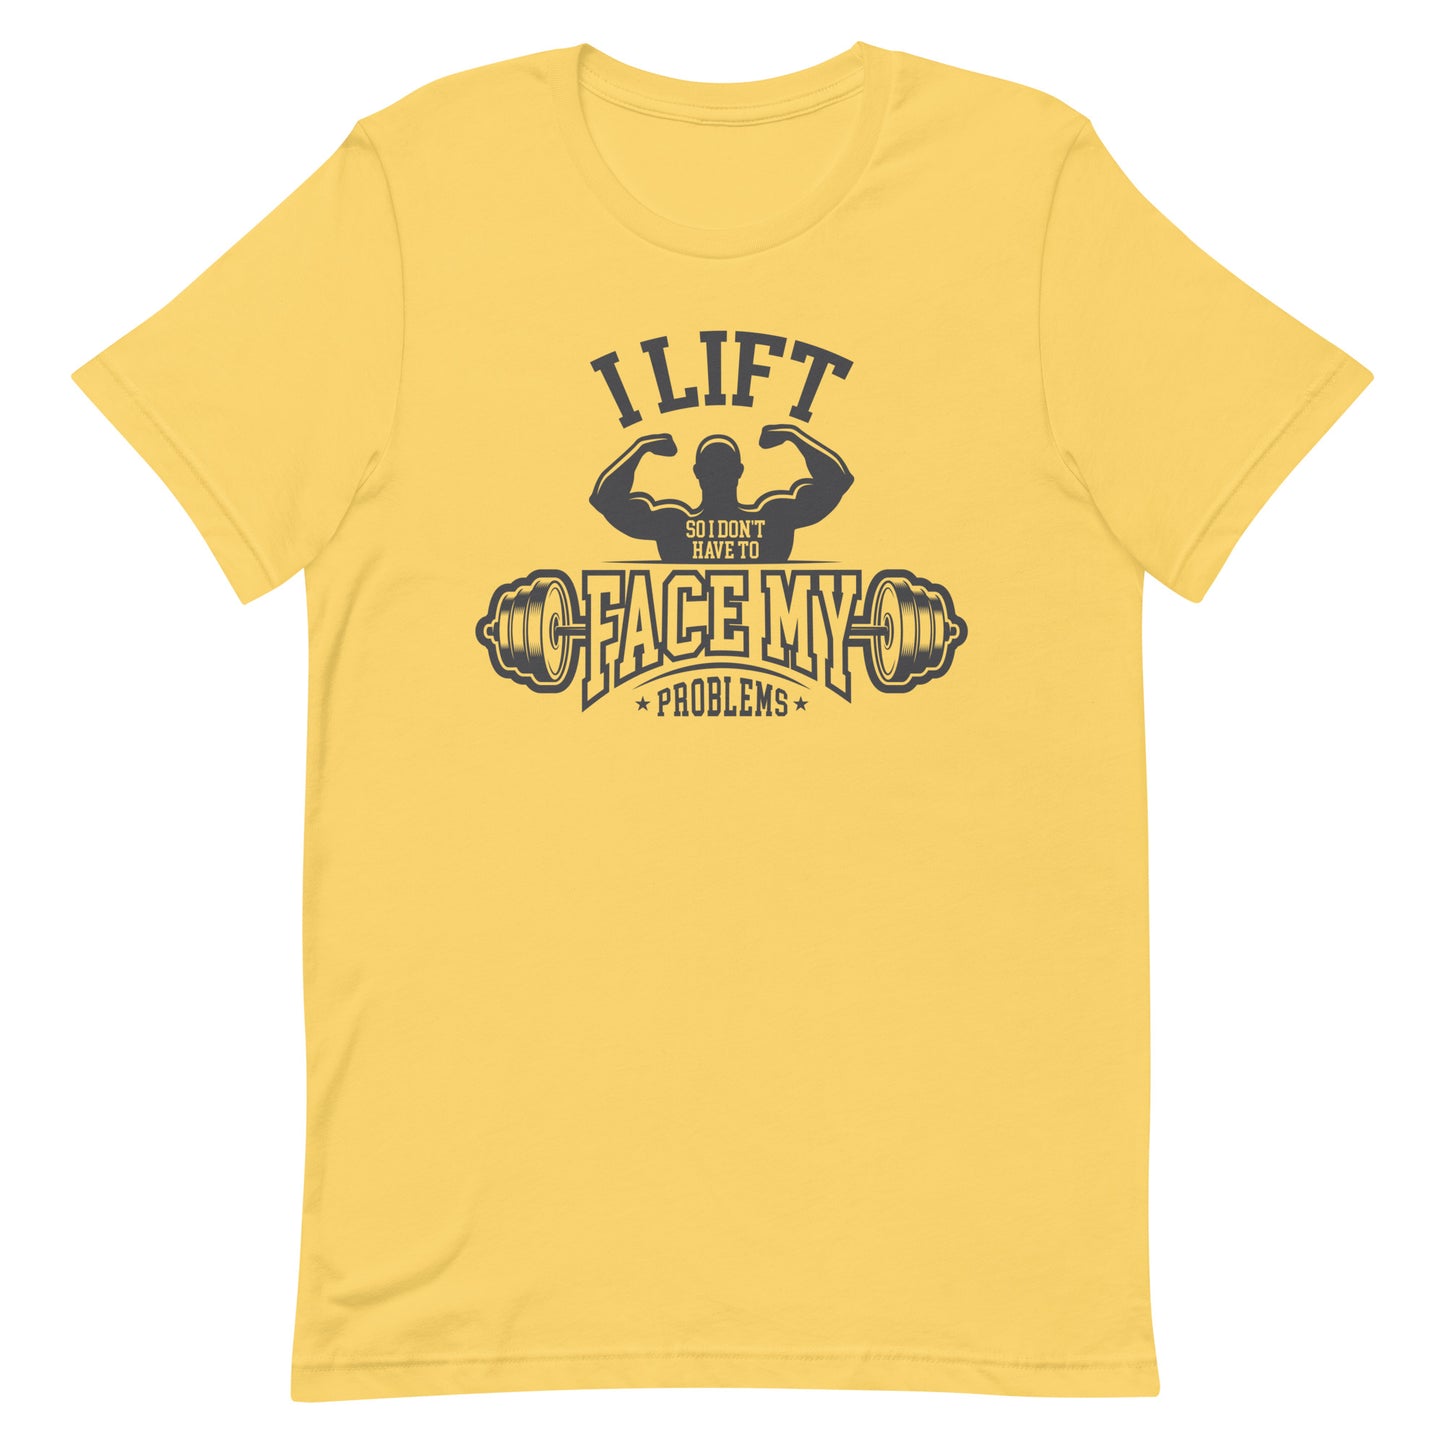 I Lift So I Don't Have to Face My Problems Unisex t-shirt